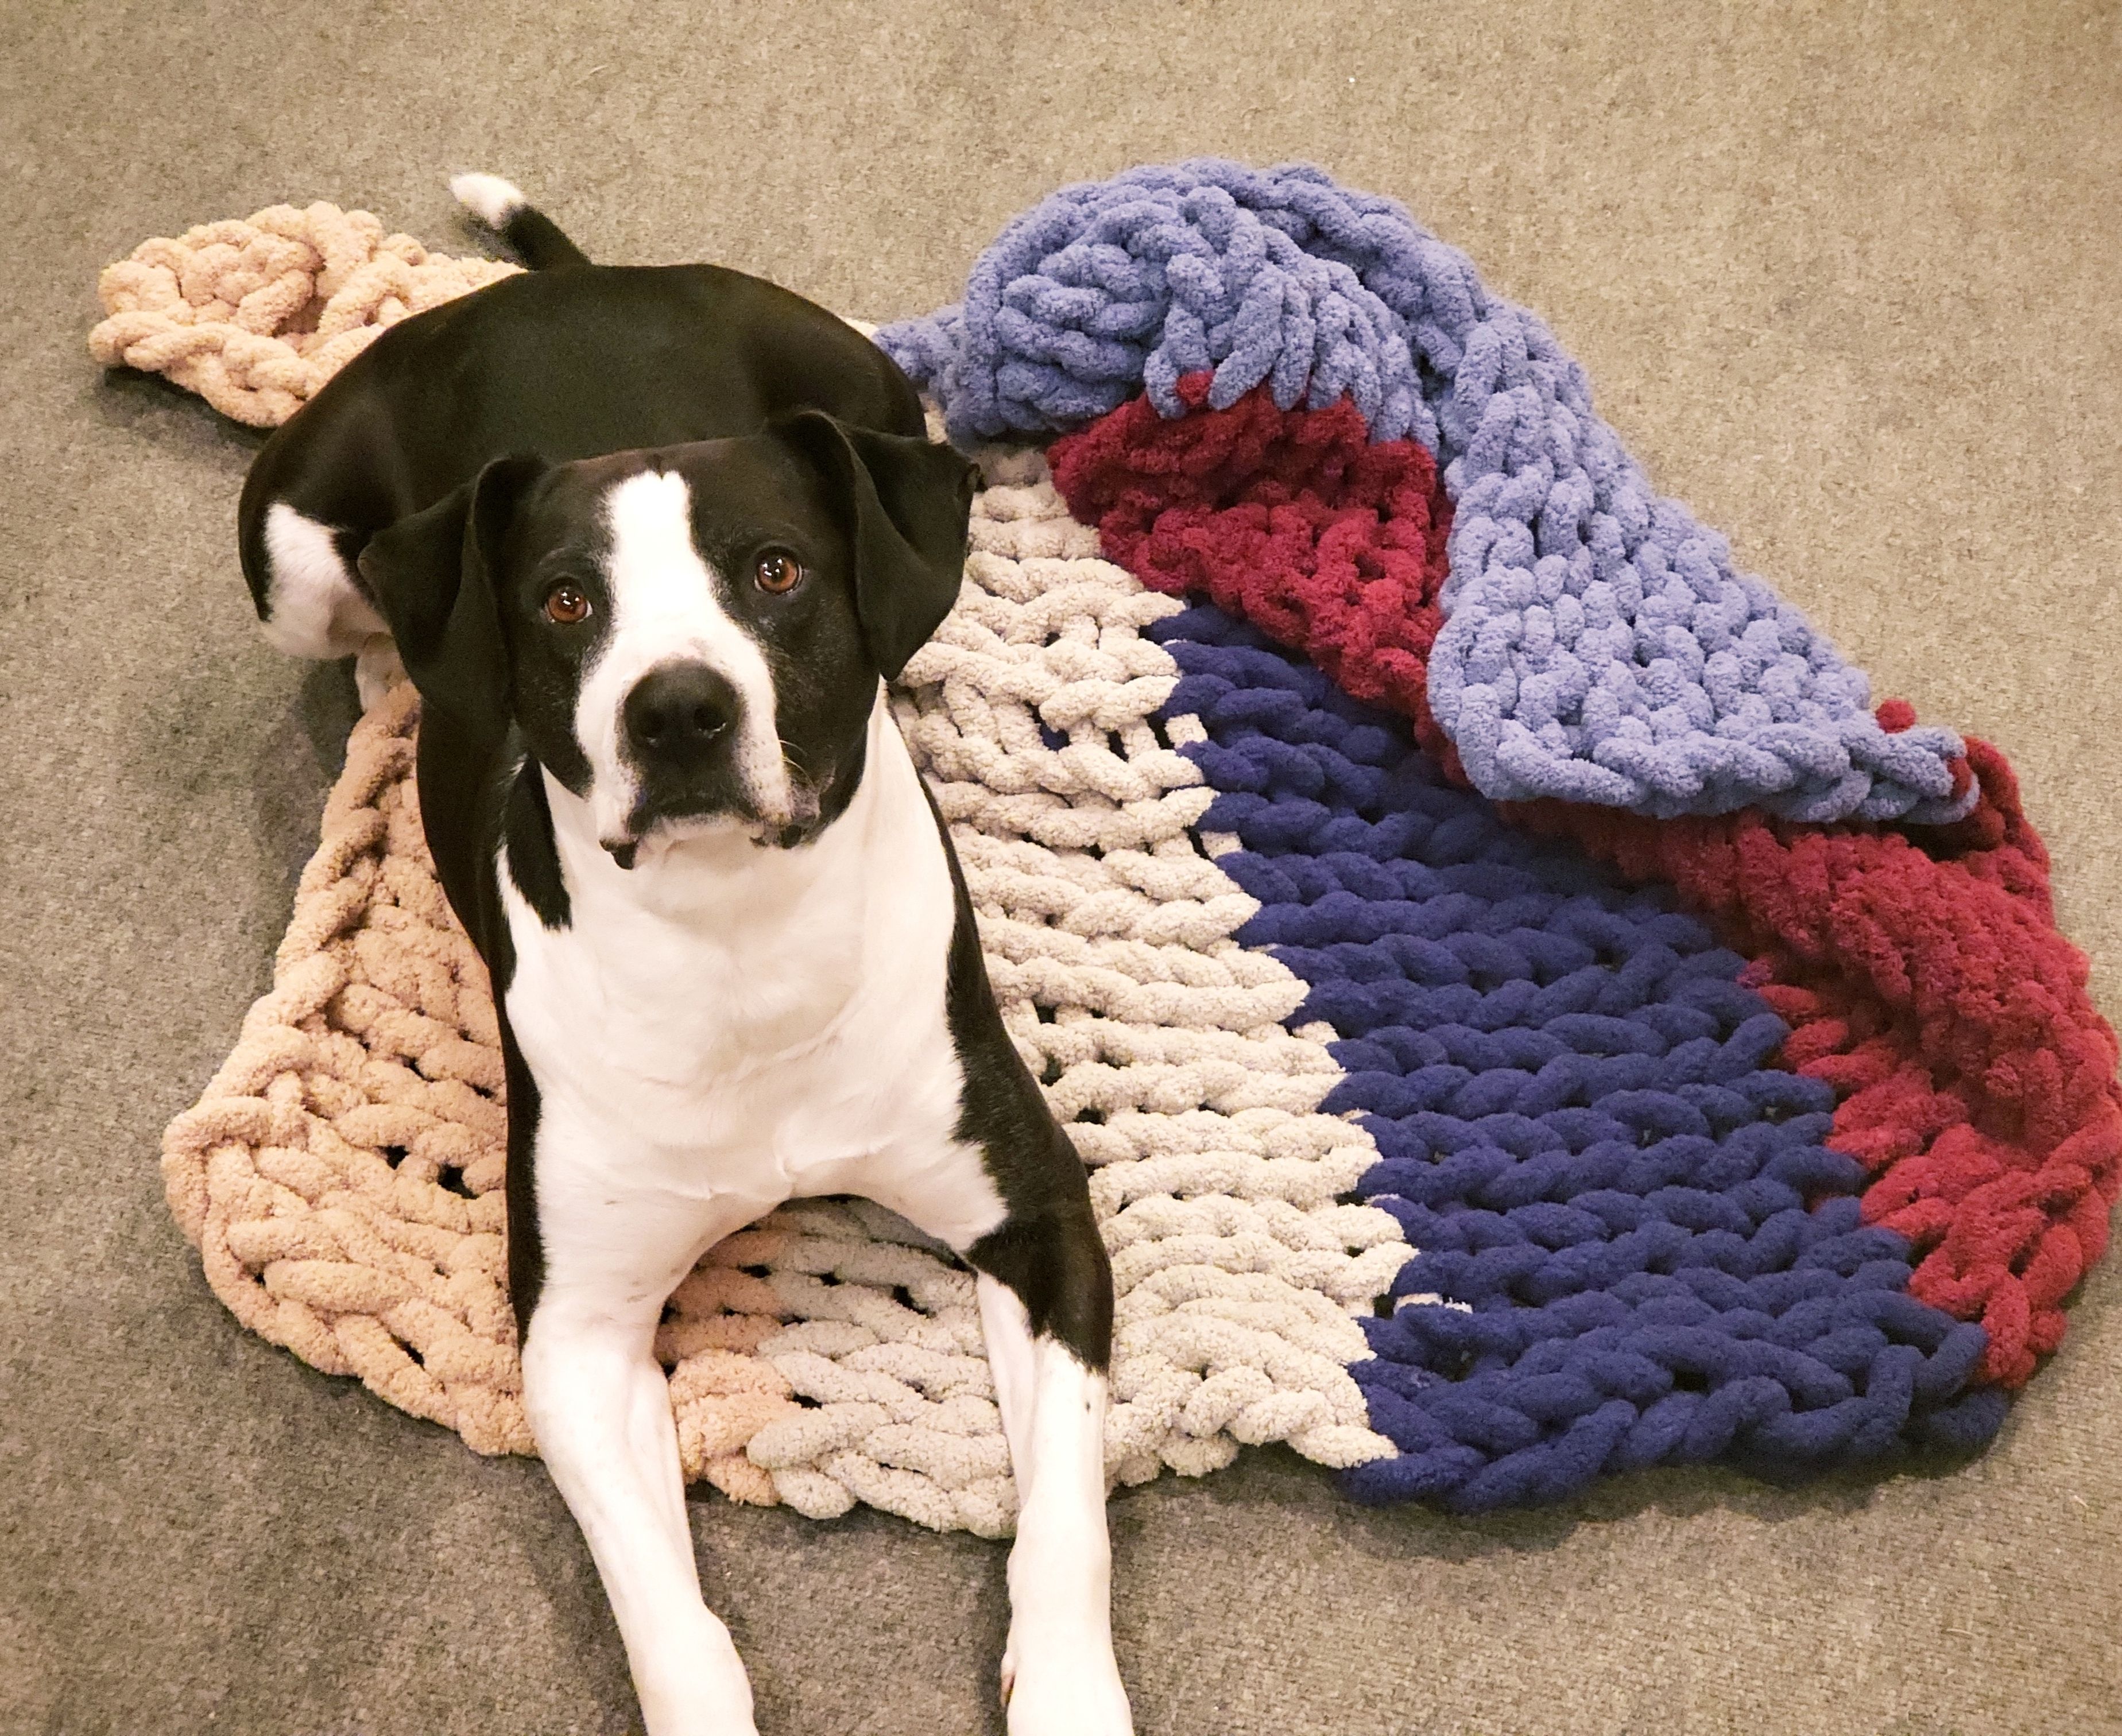 A Chunky blanket  VIRTUAL EVENT experience project by Yaymaker